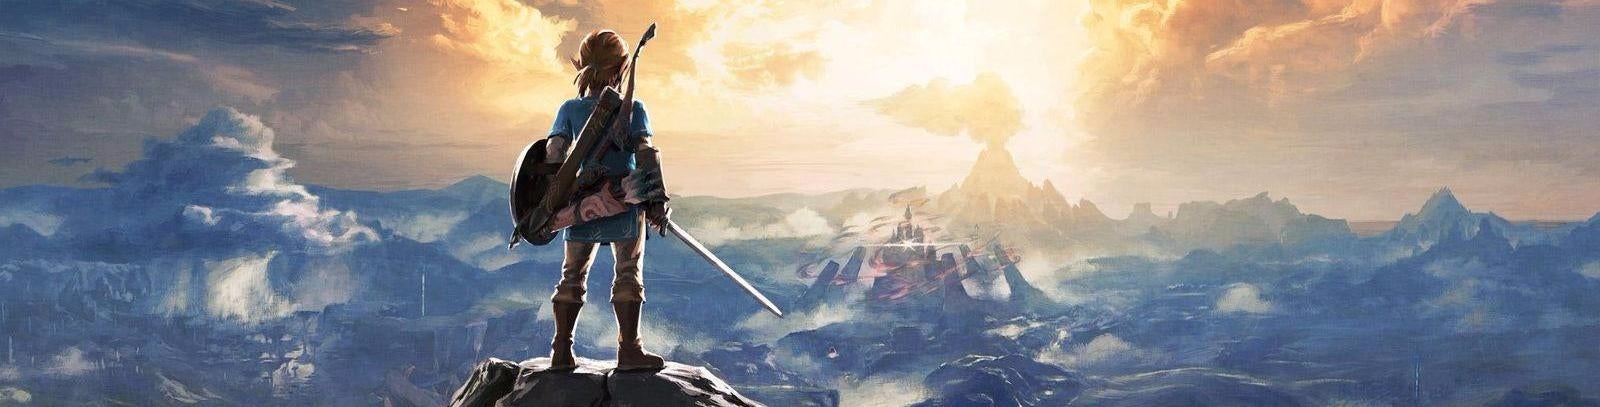 Image for Breath of the Wild shows Nintendo is learning from PC games